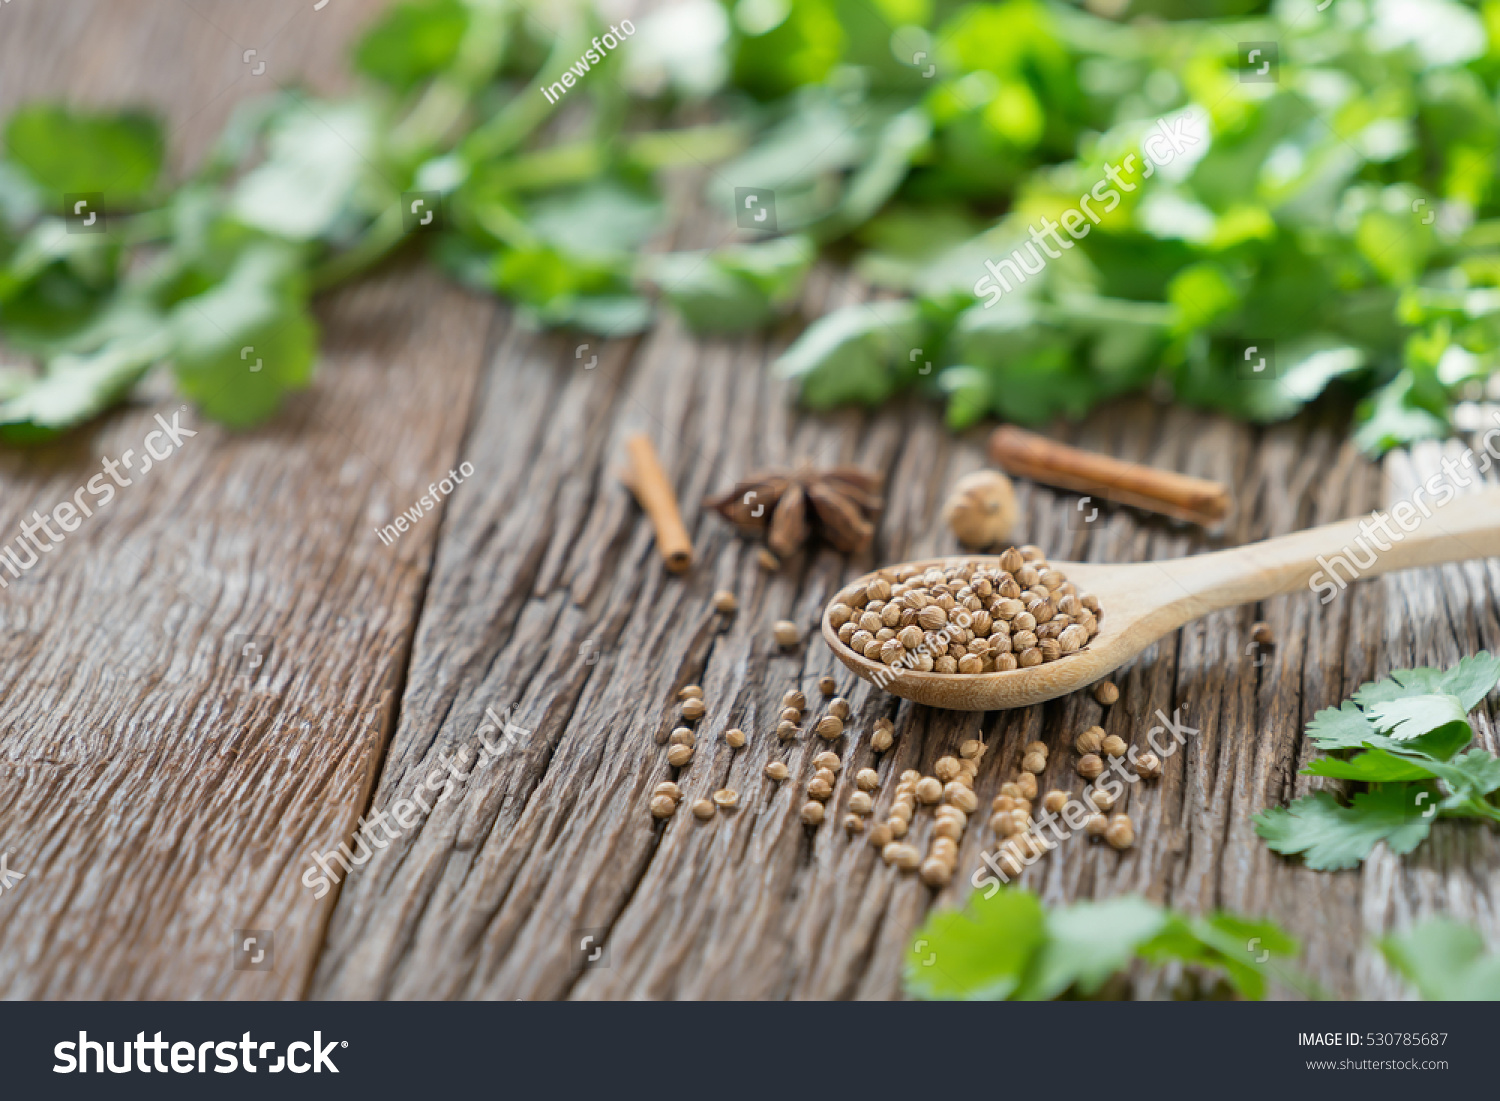 Coriander seed and leaf on wood background with copy space. #530785687